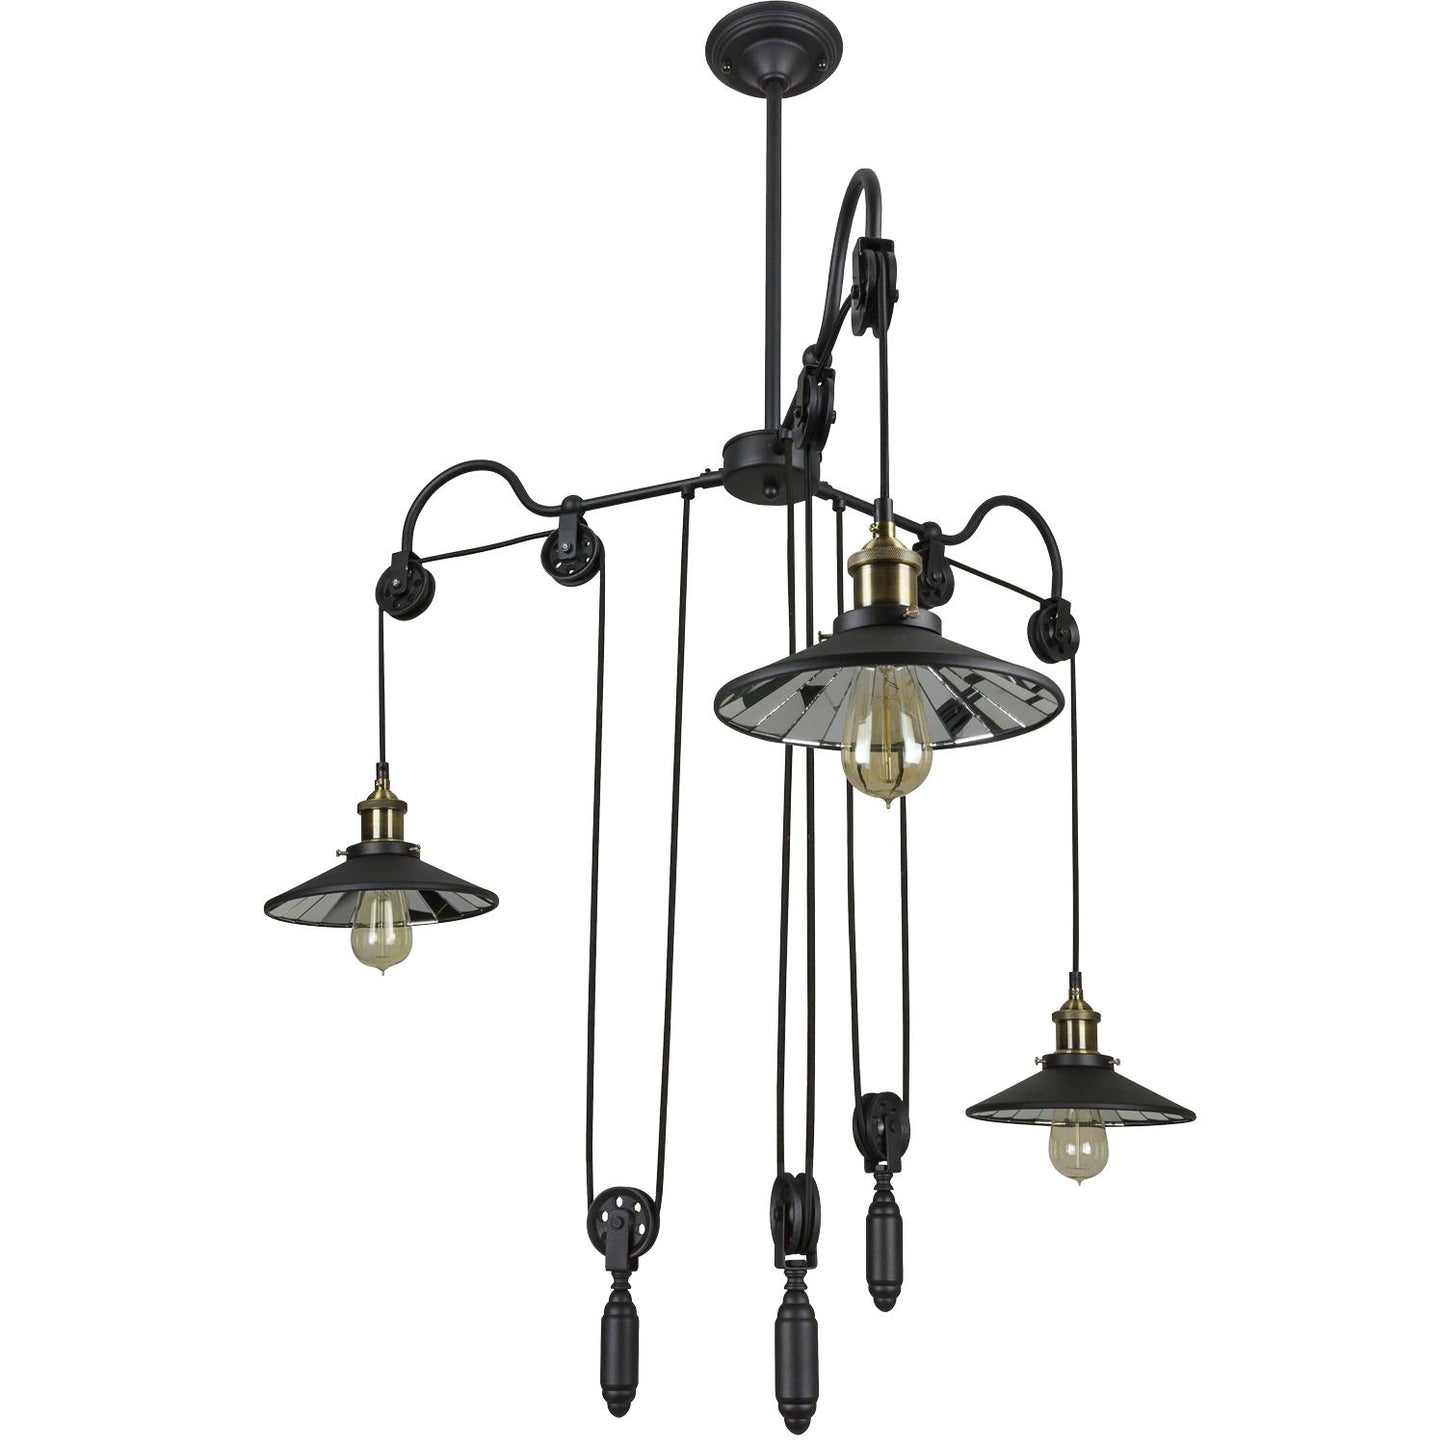 Sunlite Round Shade with weight Pendant Vintage Antique Style Fixture, Matte Black Finish